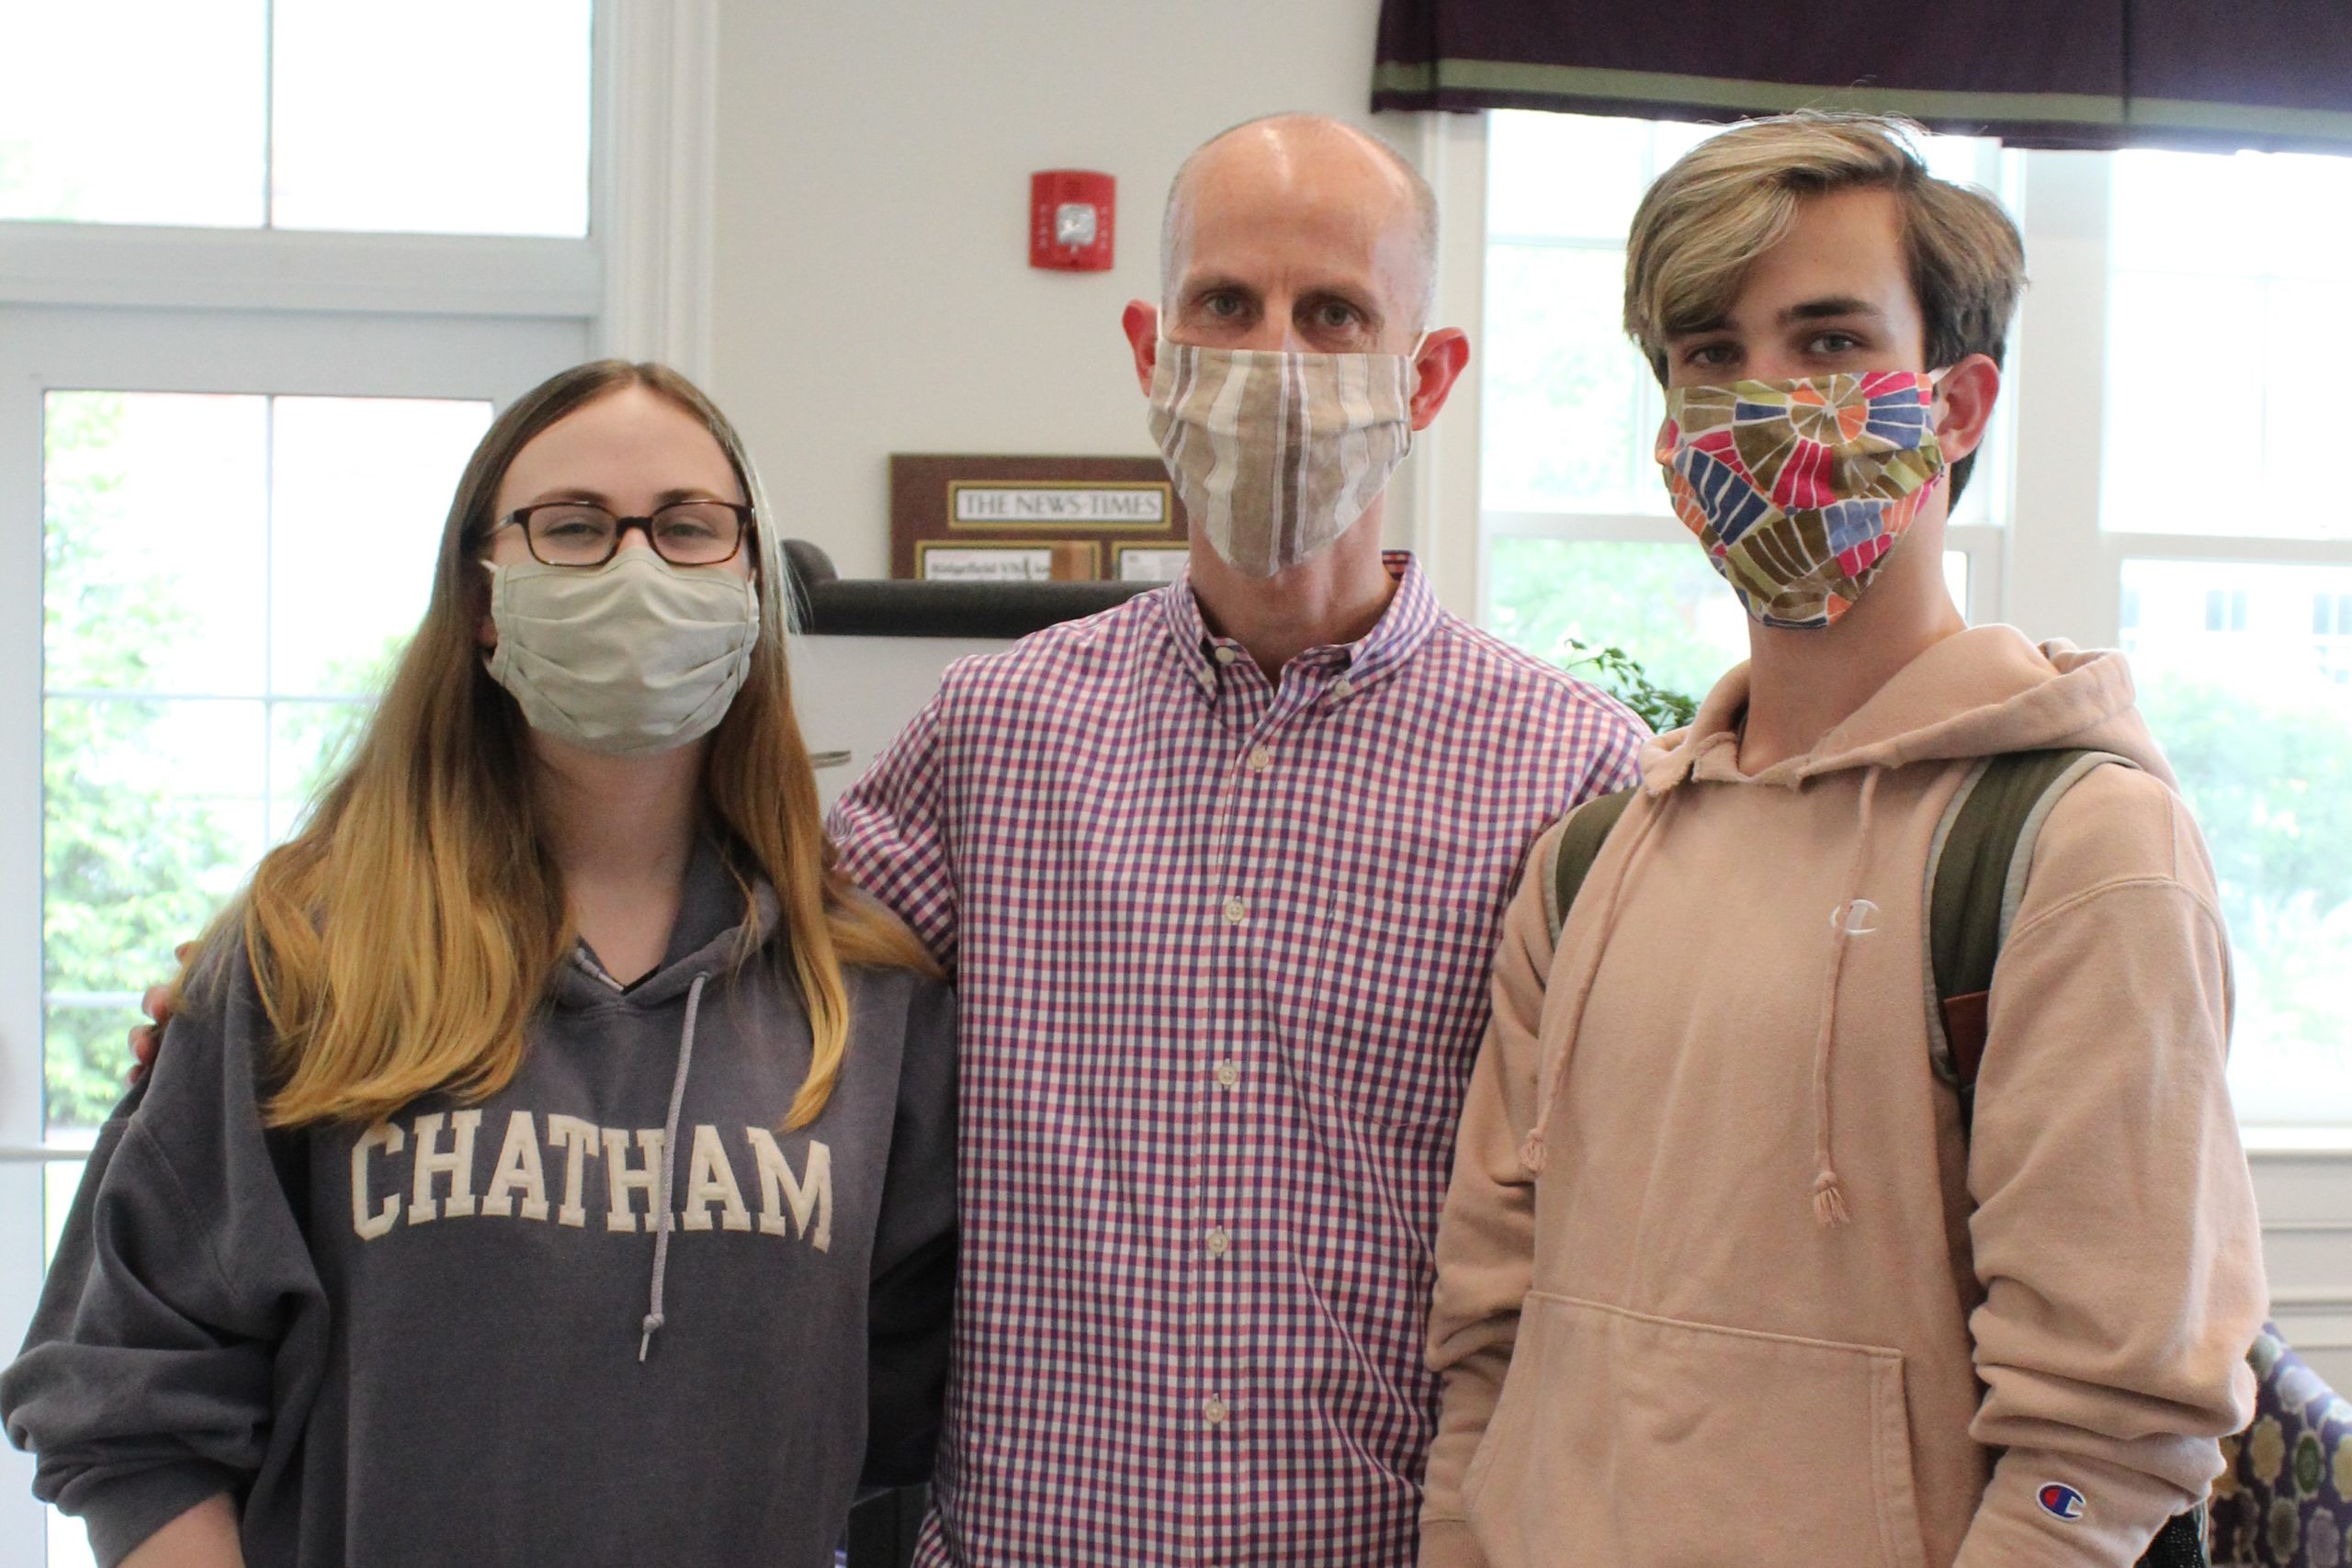 A teenage girl wearing a sweatshirt and glasses, her brother wearing a sweatshirt, and their father, all wearing masks, pose for a photo before getting their flu shots